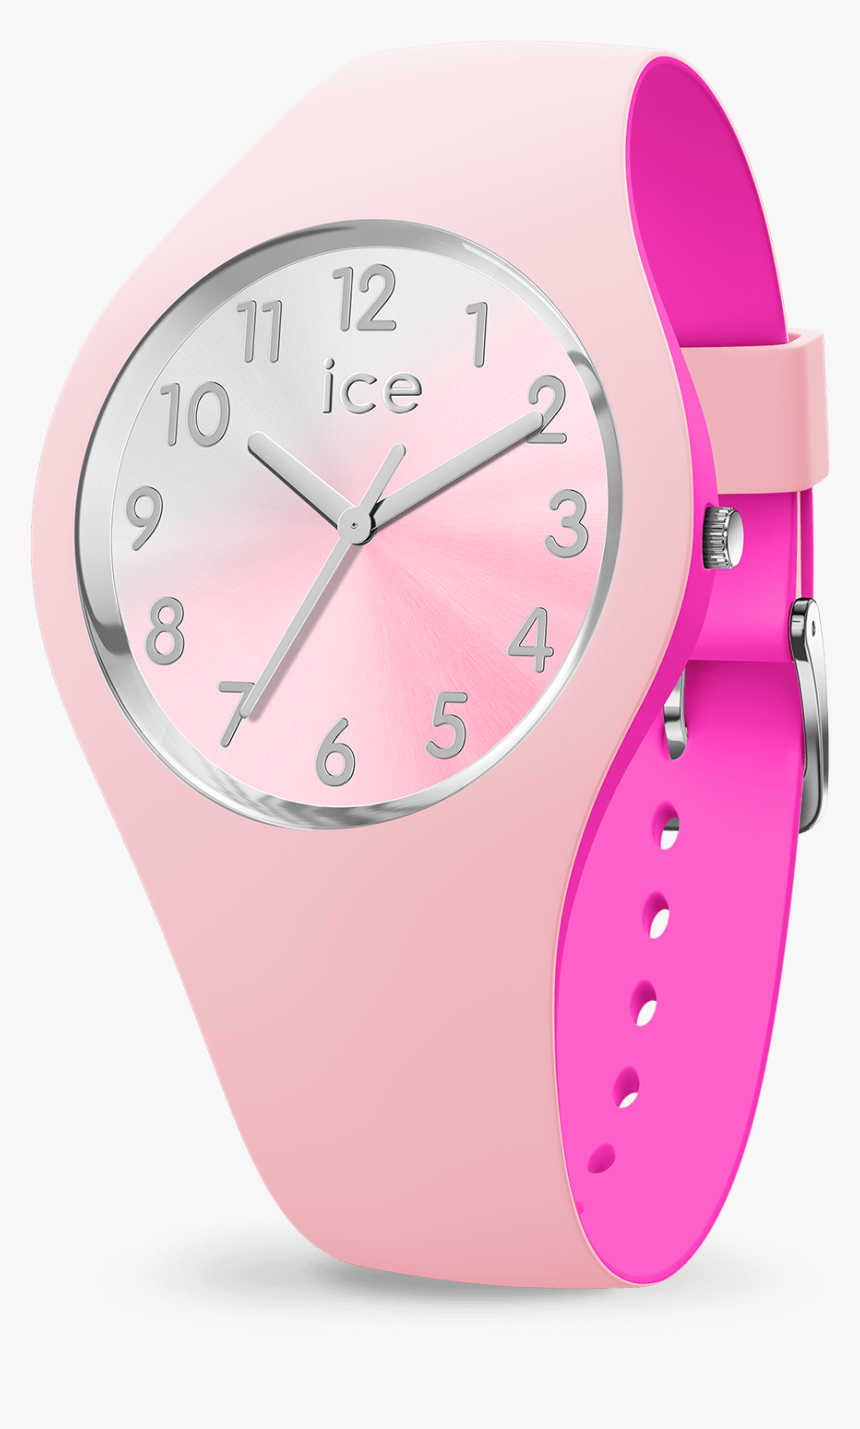 Les Montre Ice Watch Duo Chic Pink Silver A Vendre, HD Png Download, Free Download